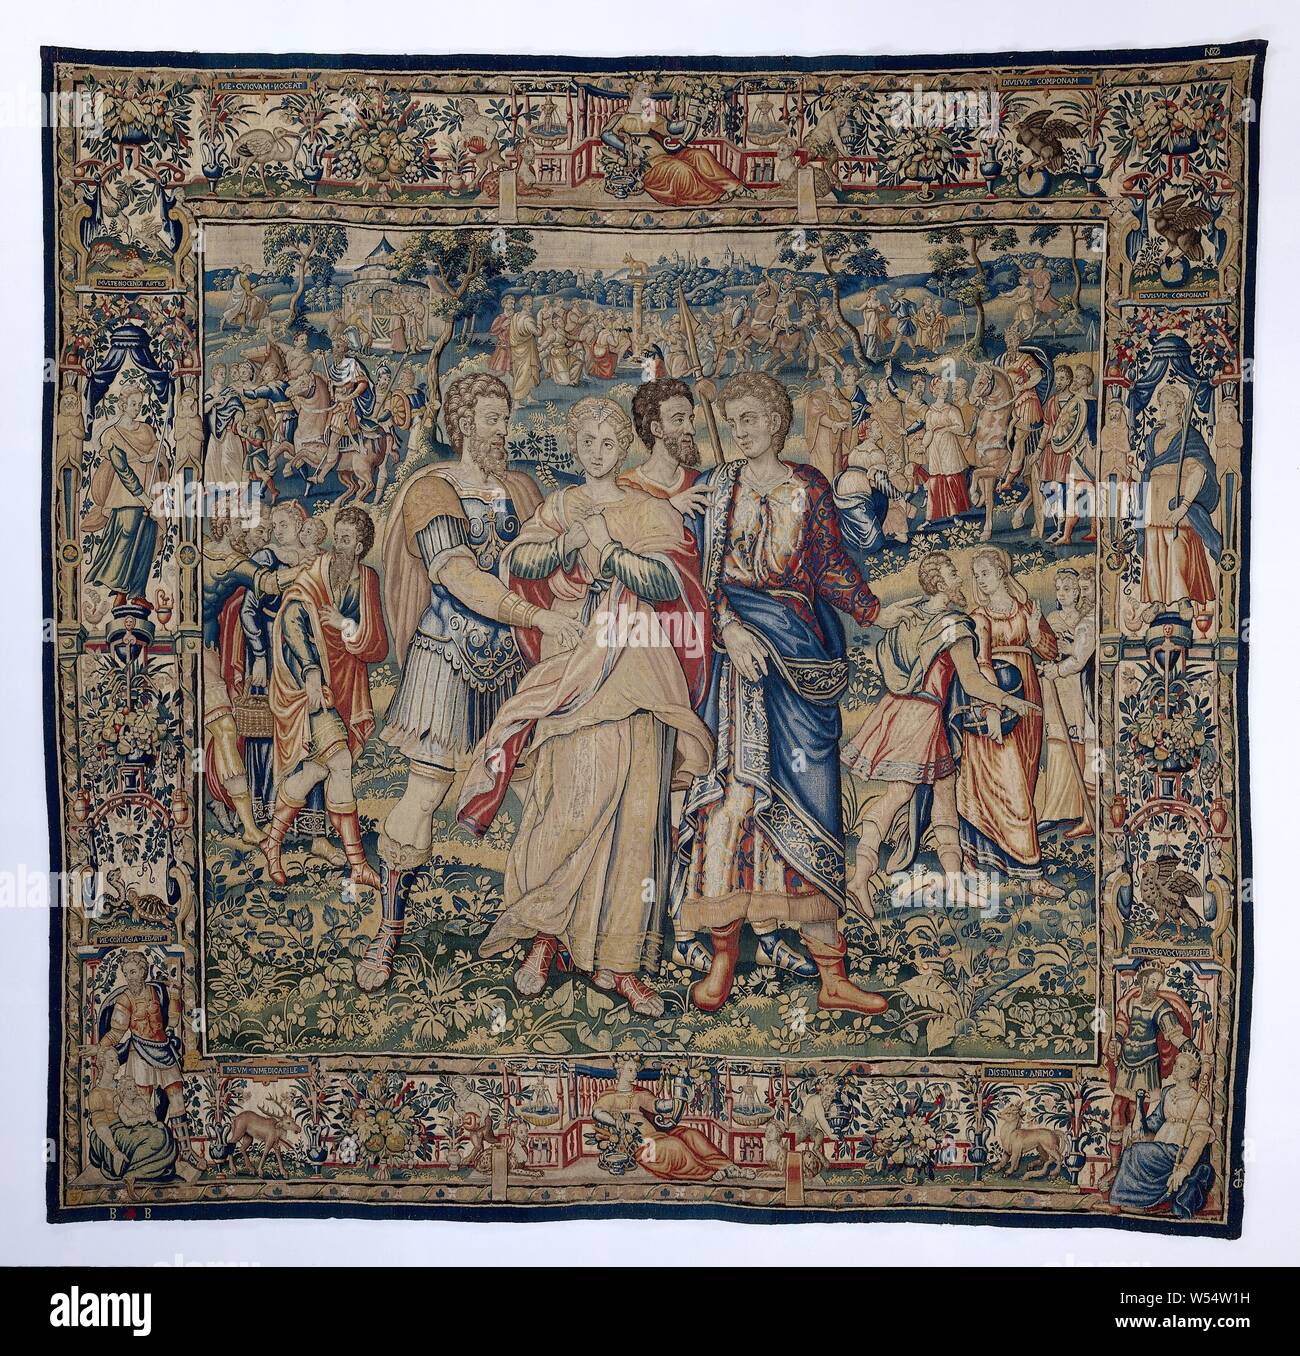 Tobit and Anna in exile to Ninevé The history of Tobit and Tobias (series title), Tapestry with the Babylonian Exile prophesied by Jeremiah (2 Chronicles 36: 20-21) after Nebuchadnezzar's destruction of Jerusalem. Marked with a weaver brand and the Brussels city coat of arms., Frans Geubels, Brussels, c. 1560 - c. 1575, ketting, inslag, tapestry, h 328 cm × w 338 cm Stock Photo